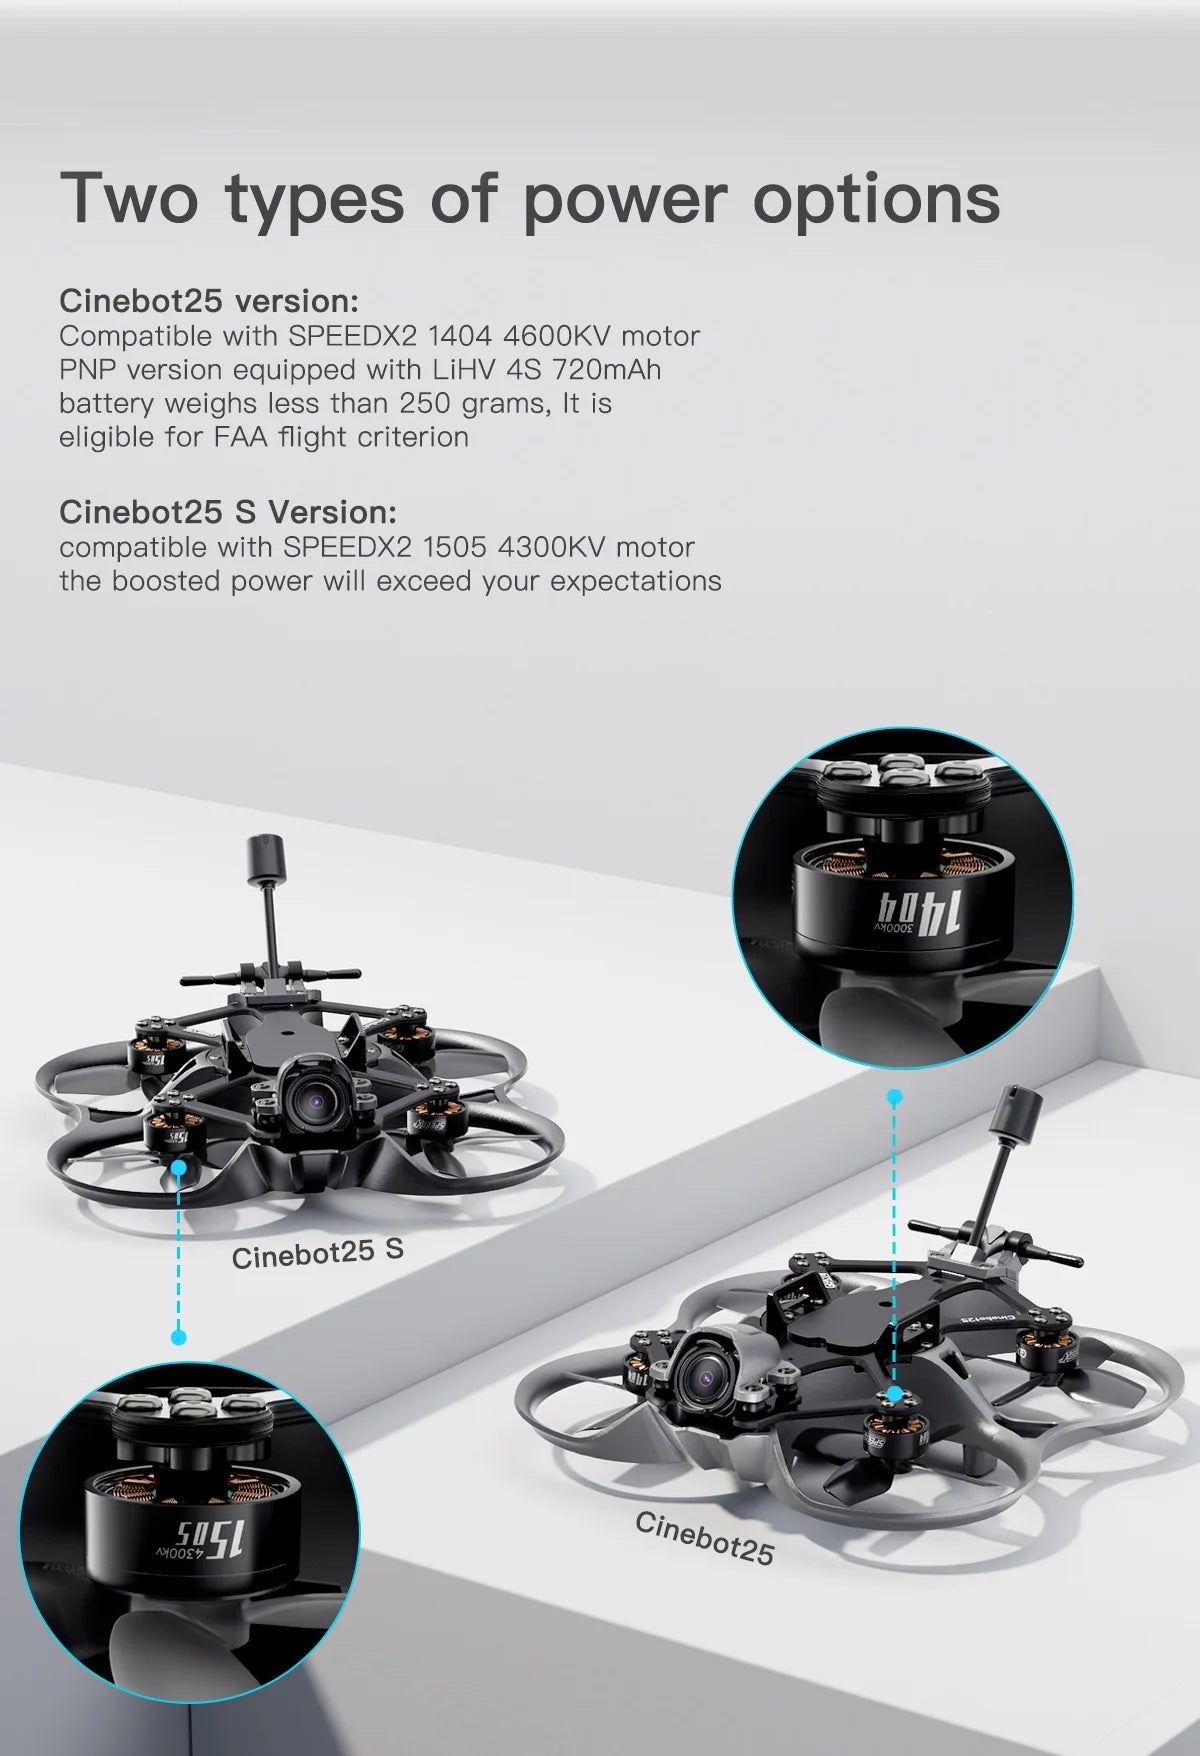 GEPRC Cinebot25 S WTFPV 2.5inch FPV Drone, Cinebot25 S Version: compatible with SPEEDX2 1404 4600KV